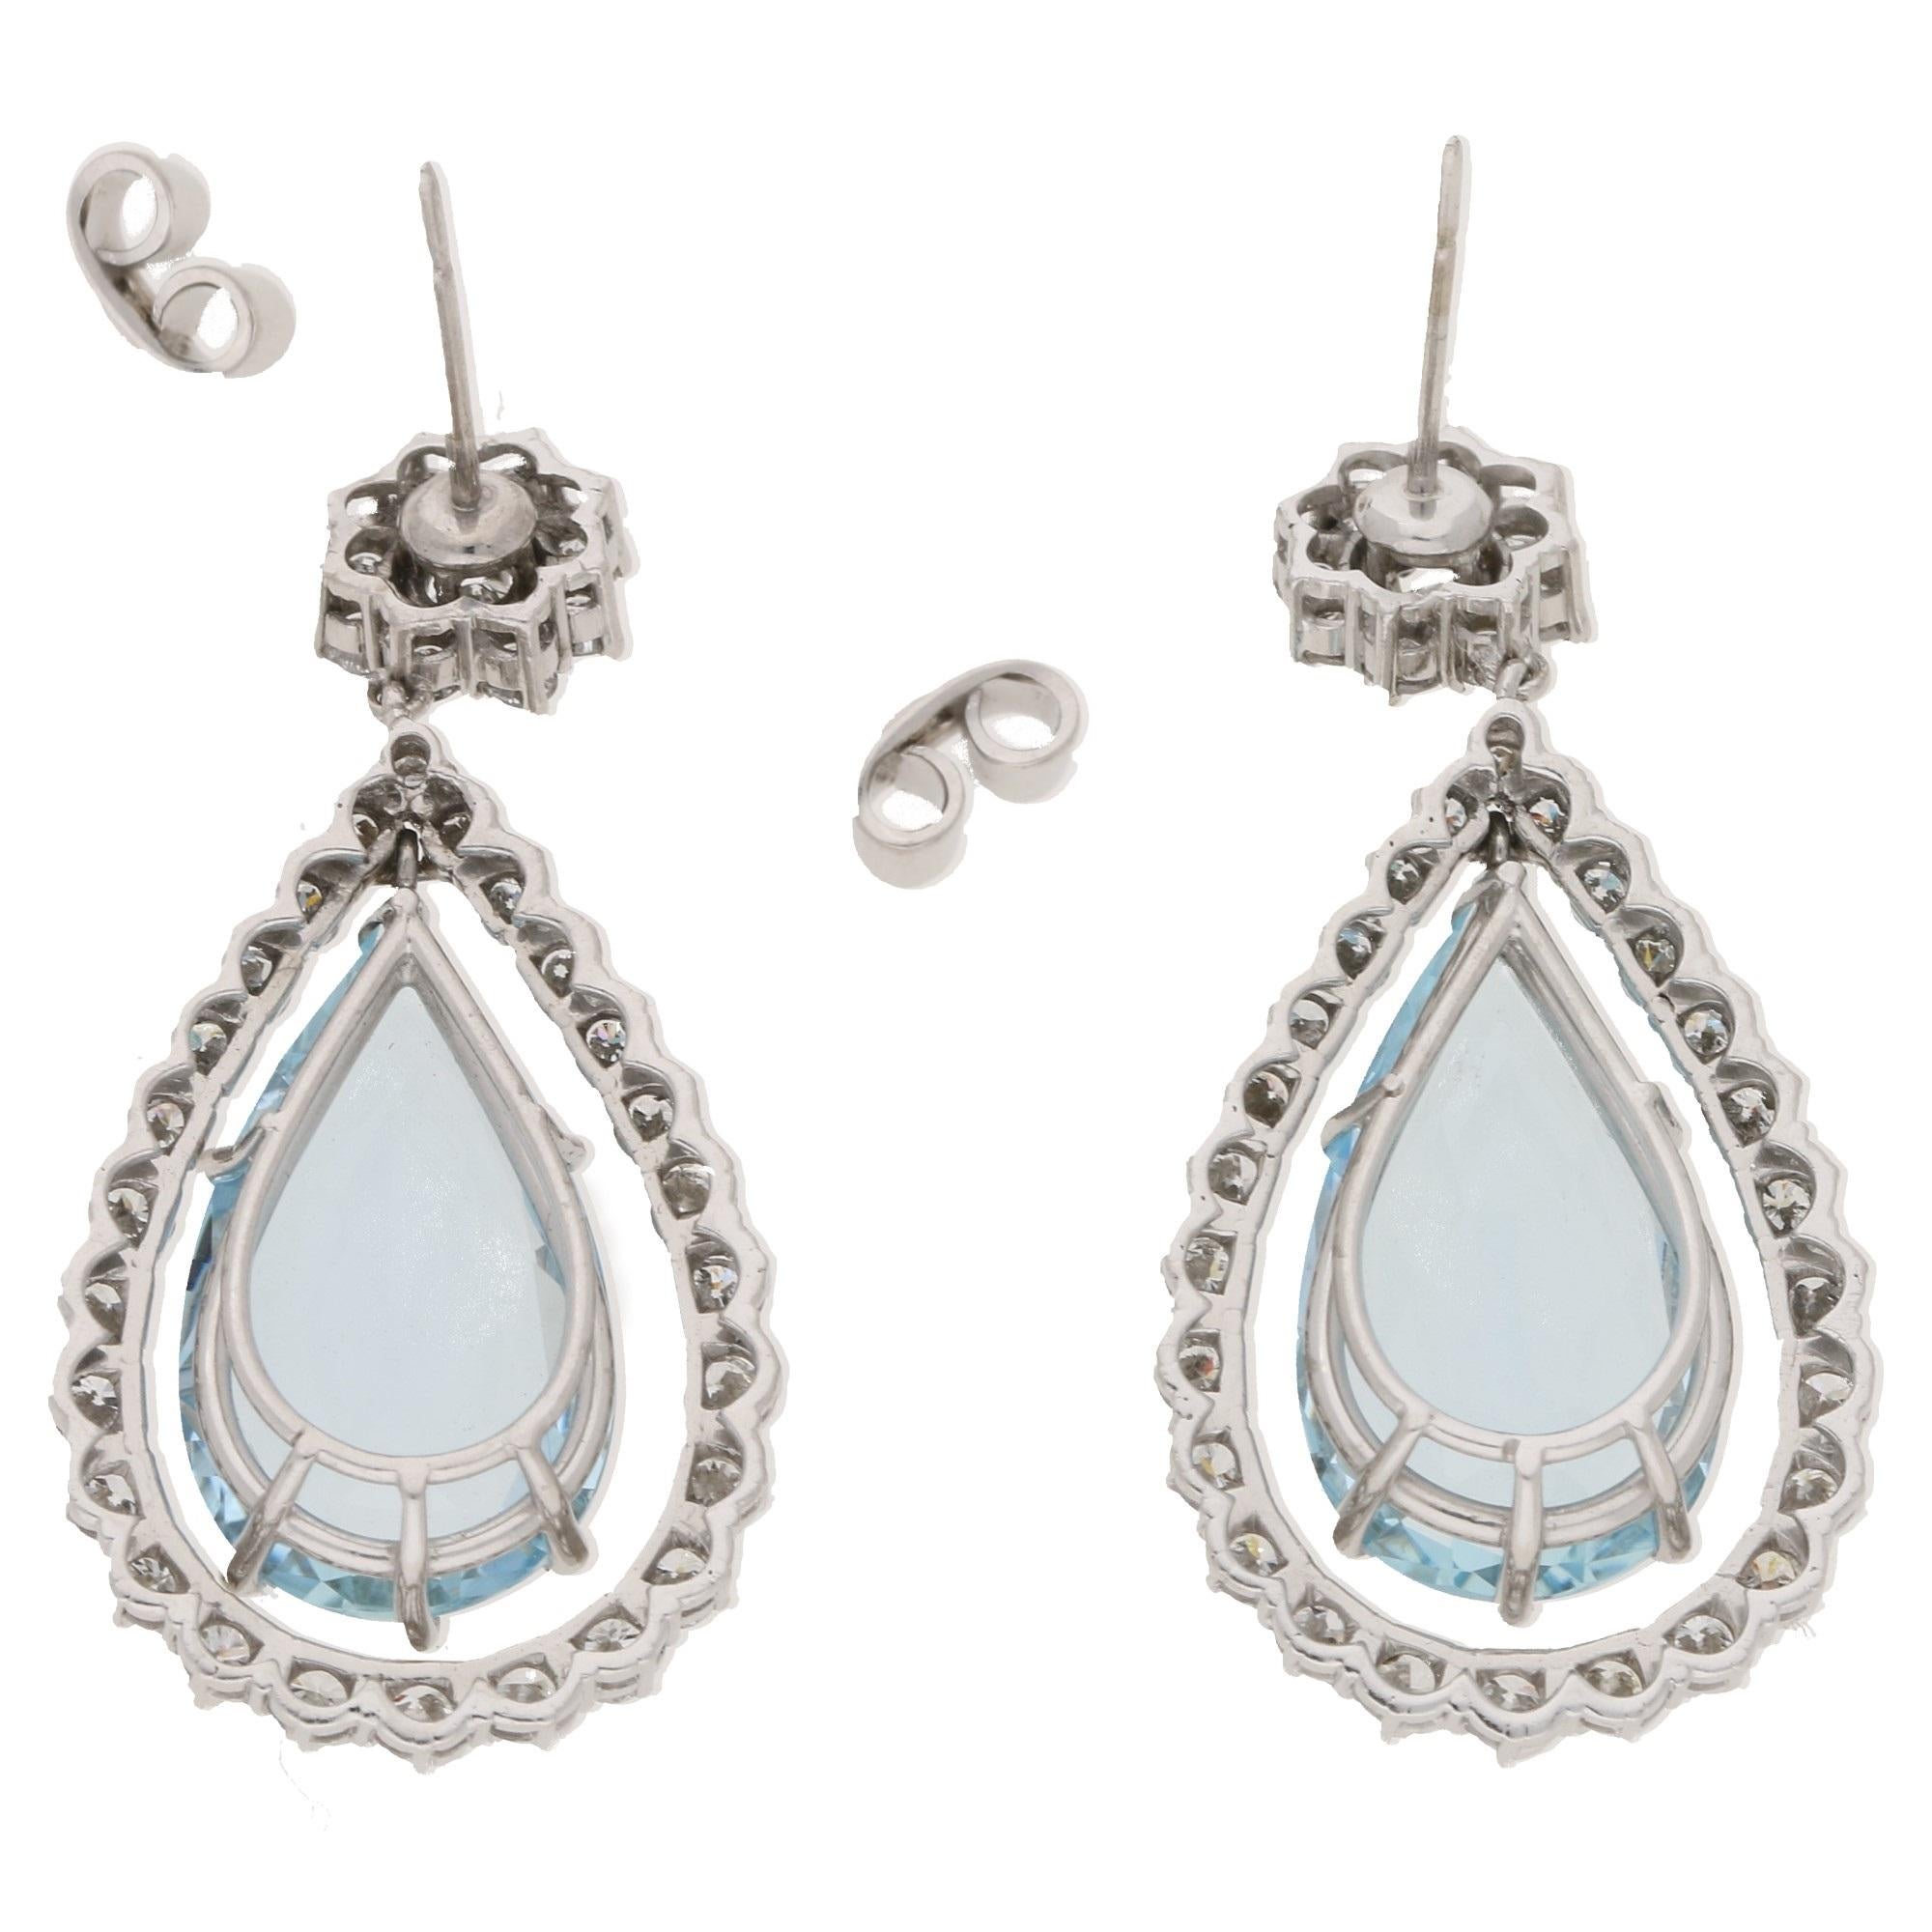 This impressive pair of aquamarine and diamond drop earrings feature the classic round brilliant - cut diamond cluster stud suspending approximately 3 carats of AA pear - shaped aquamarines in each earring, further accented by a graduated floating